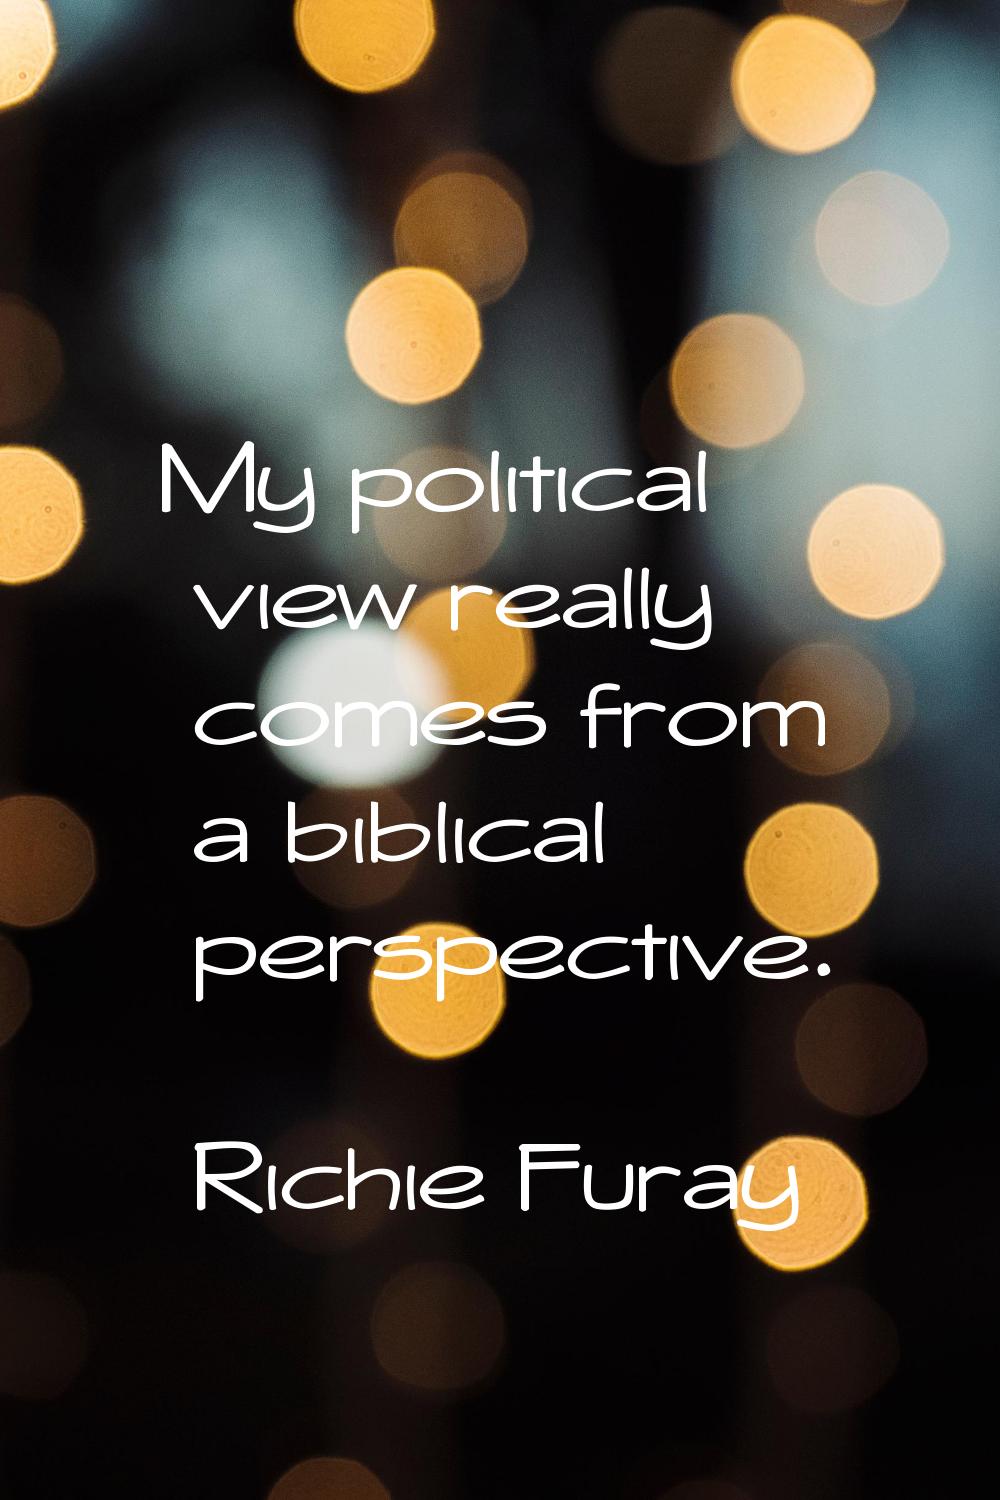 My political view really comes from a biblical perspective.